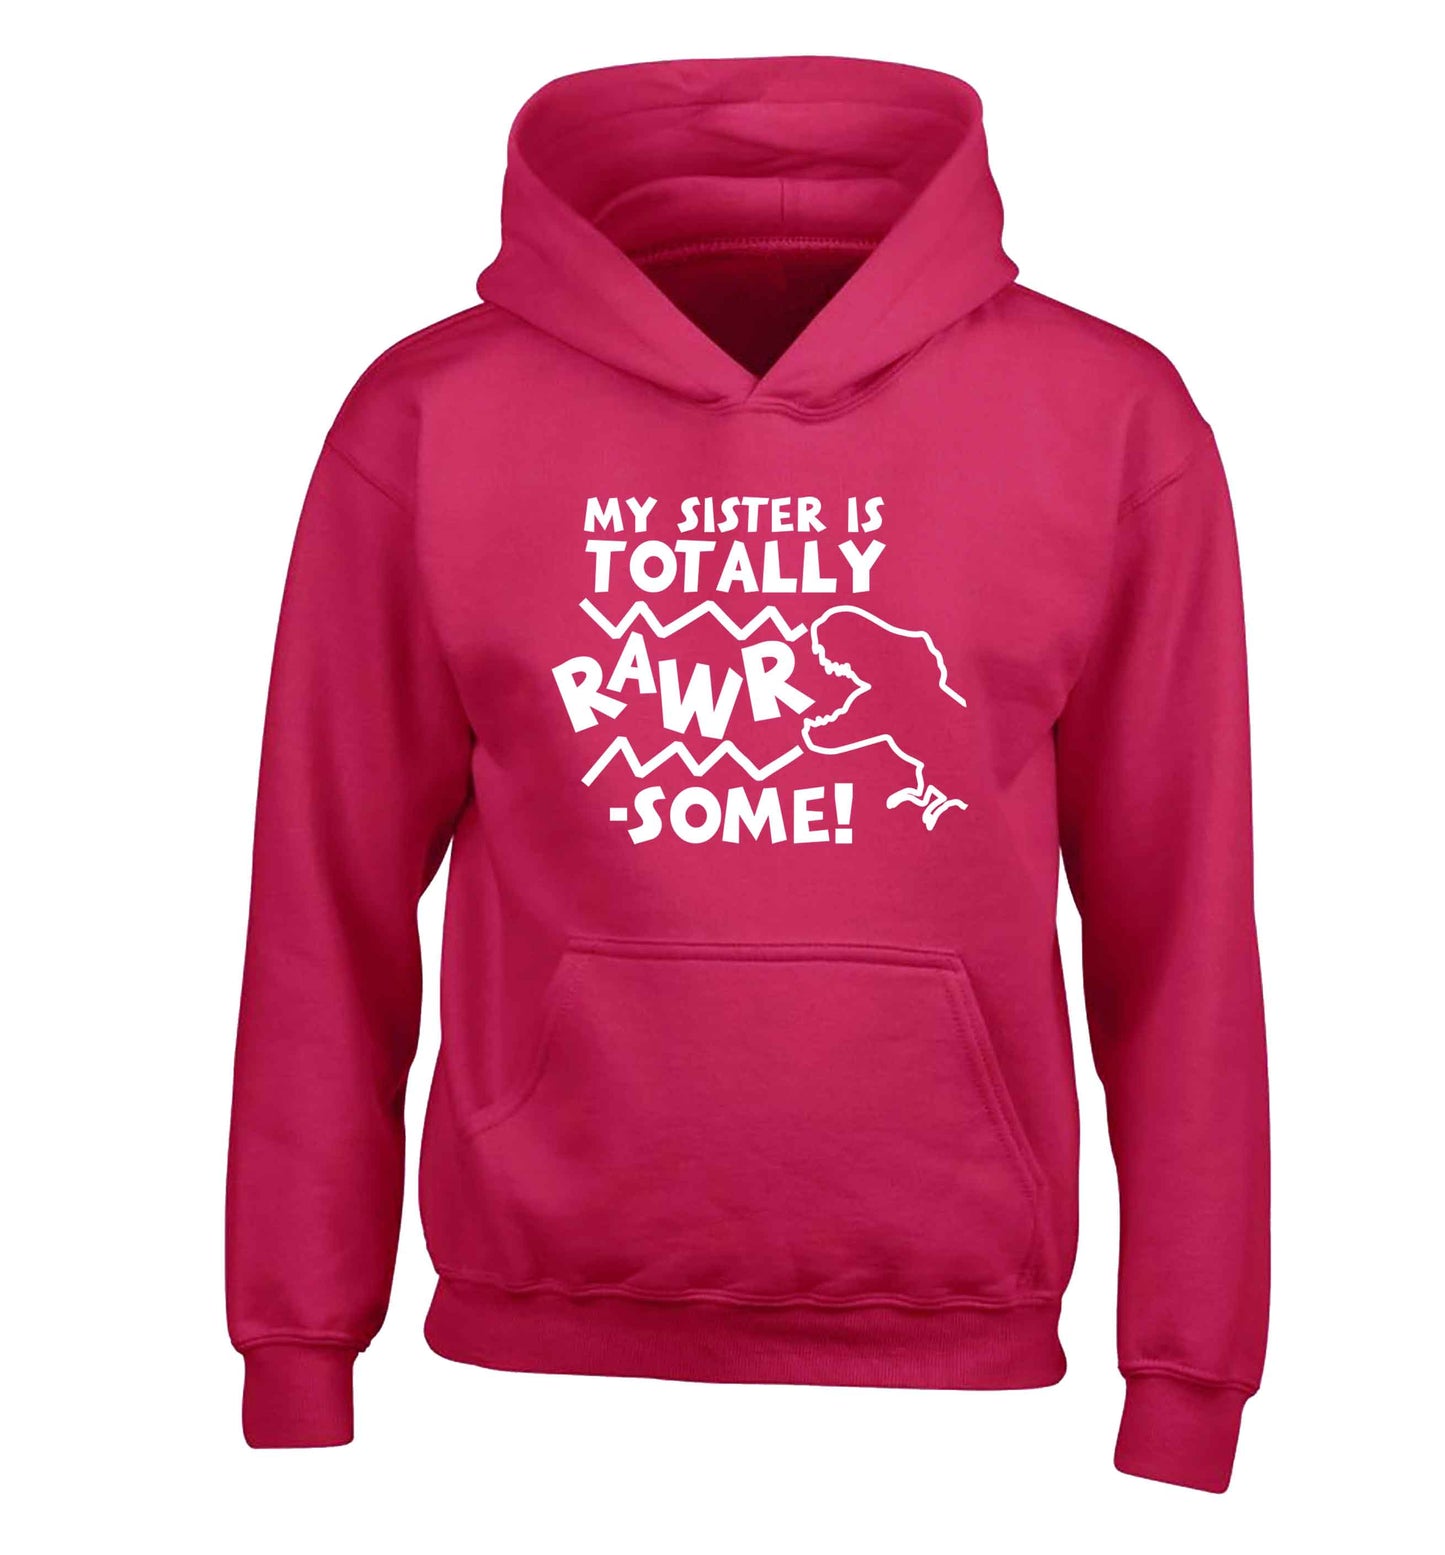 My sister is totally rawrsome children's pink hoodie 12-13 Years